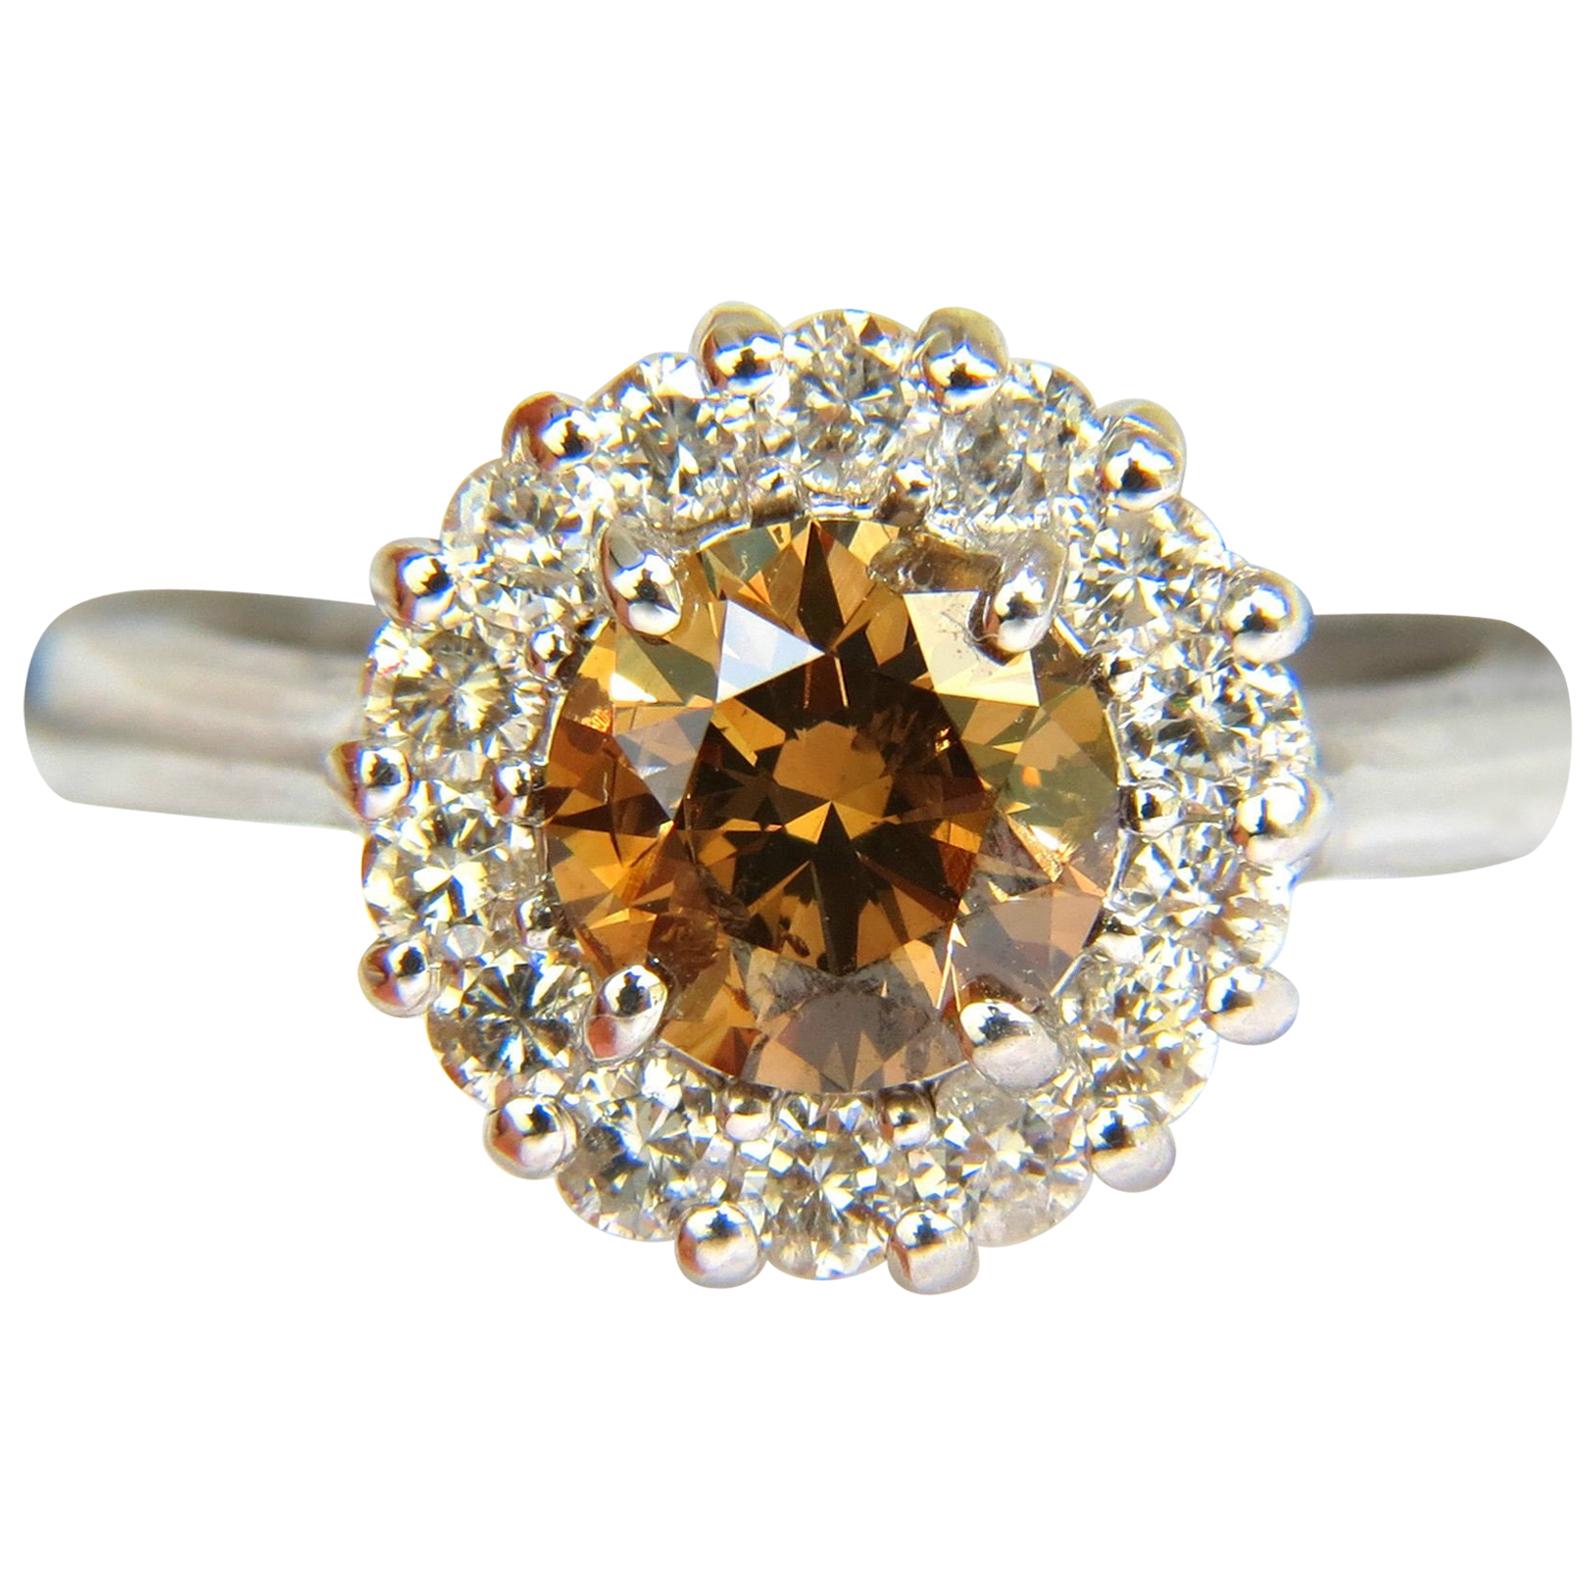 2.01 Carat Natural Fancy Orange Brown Diamond Cluster Halo Ring G/VS Full Cuts For Sale